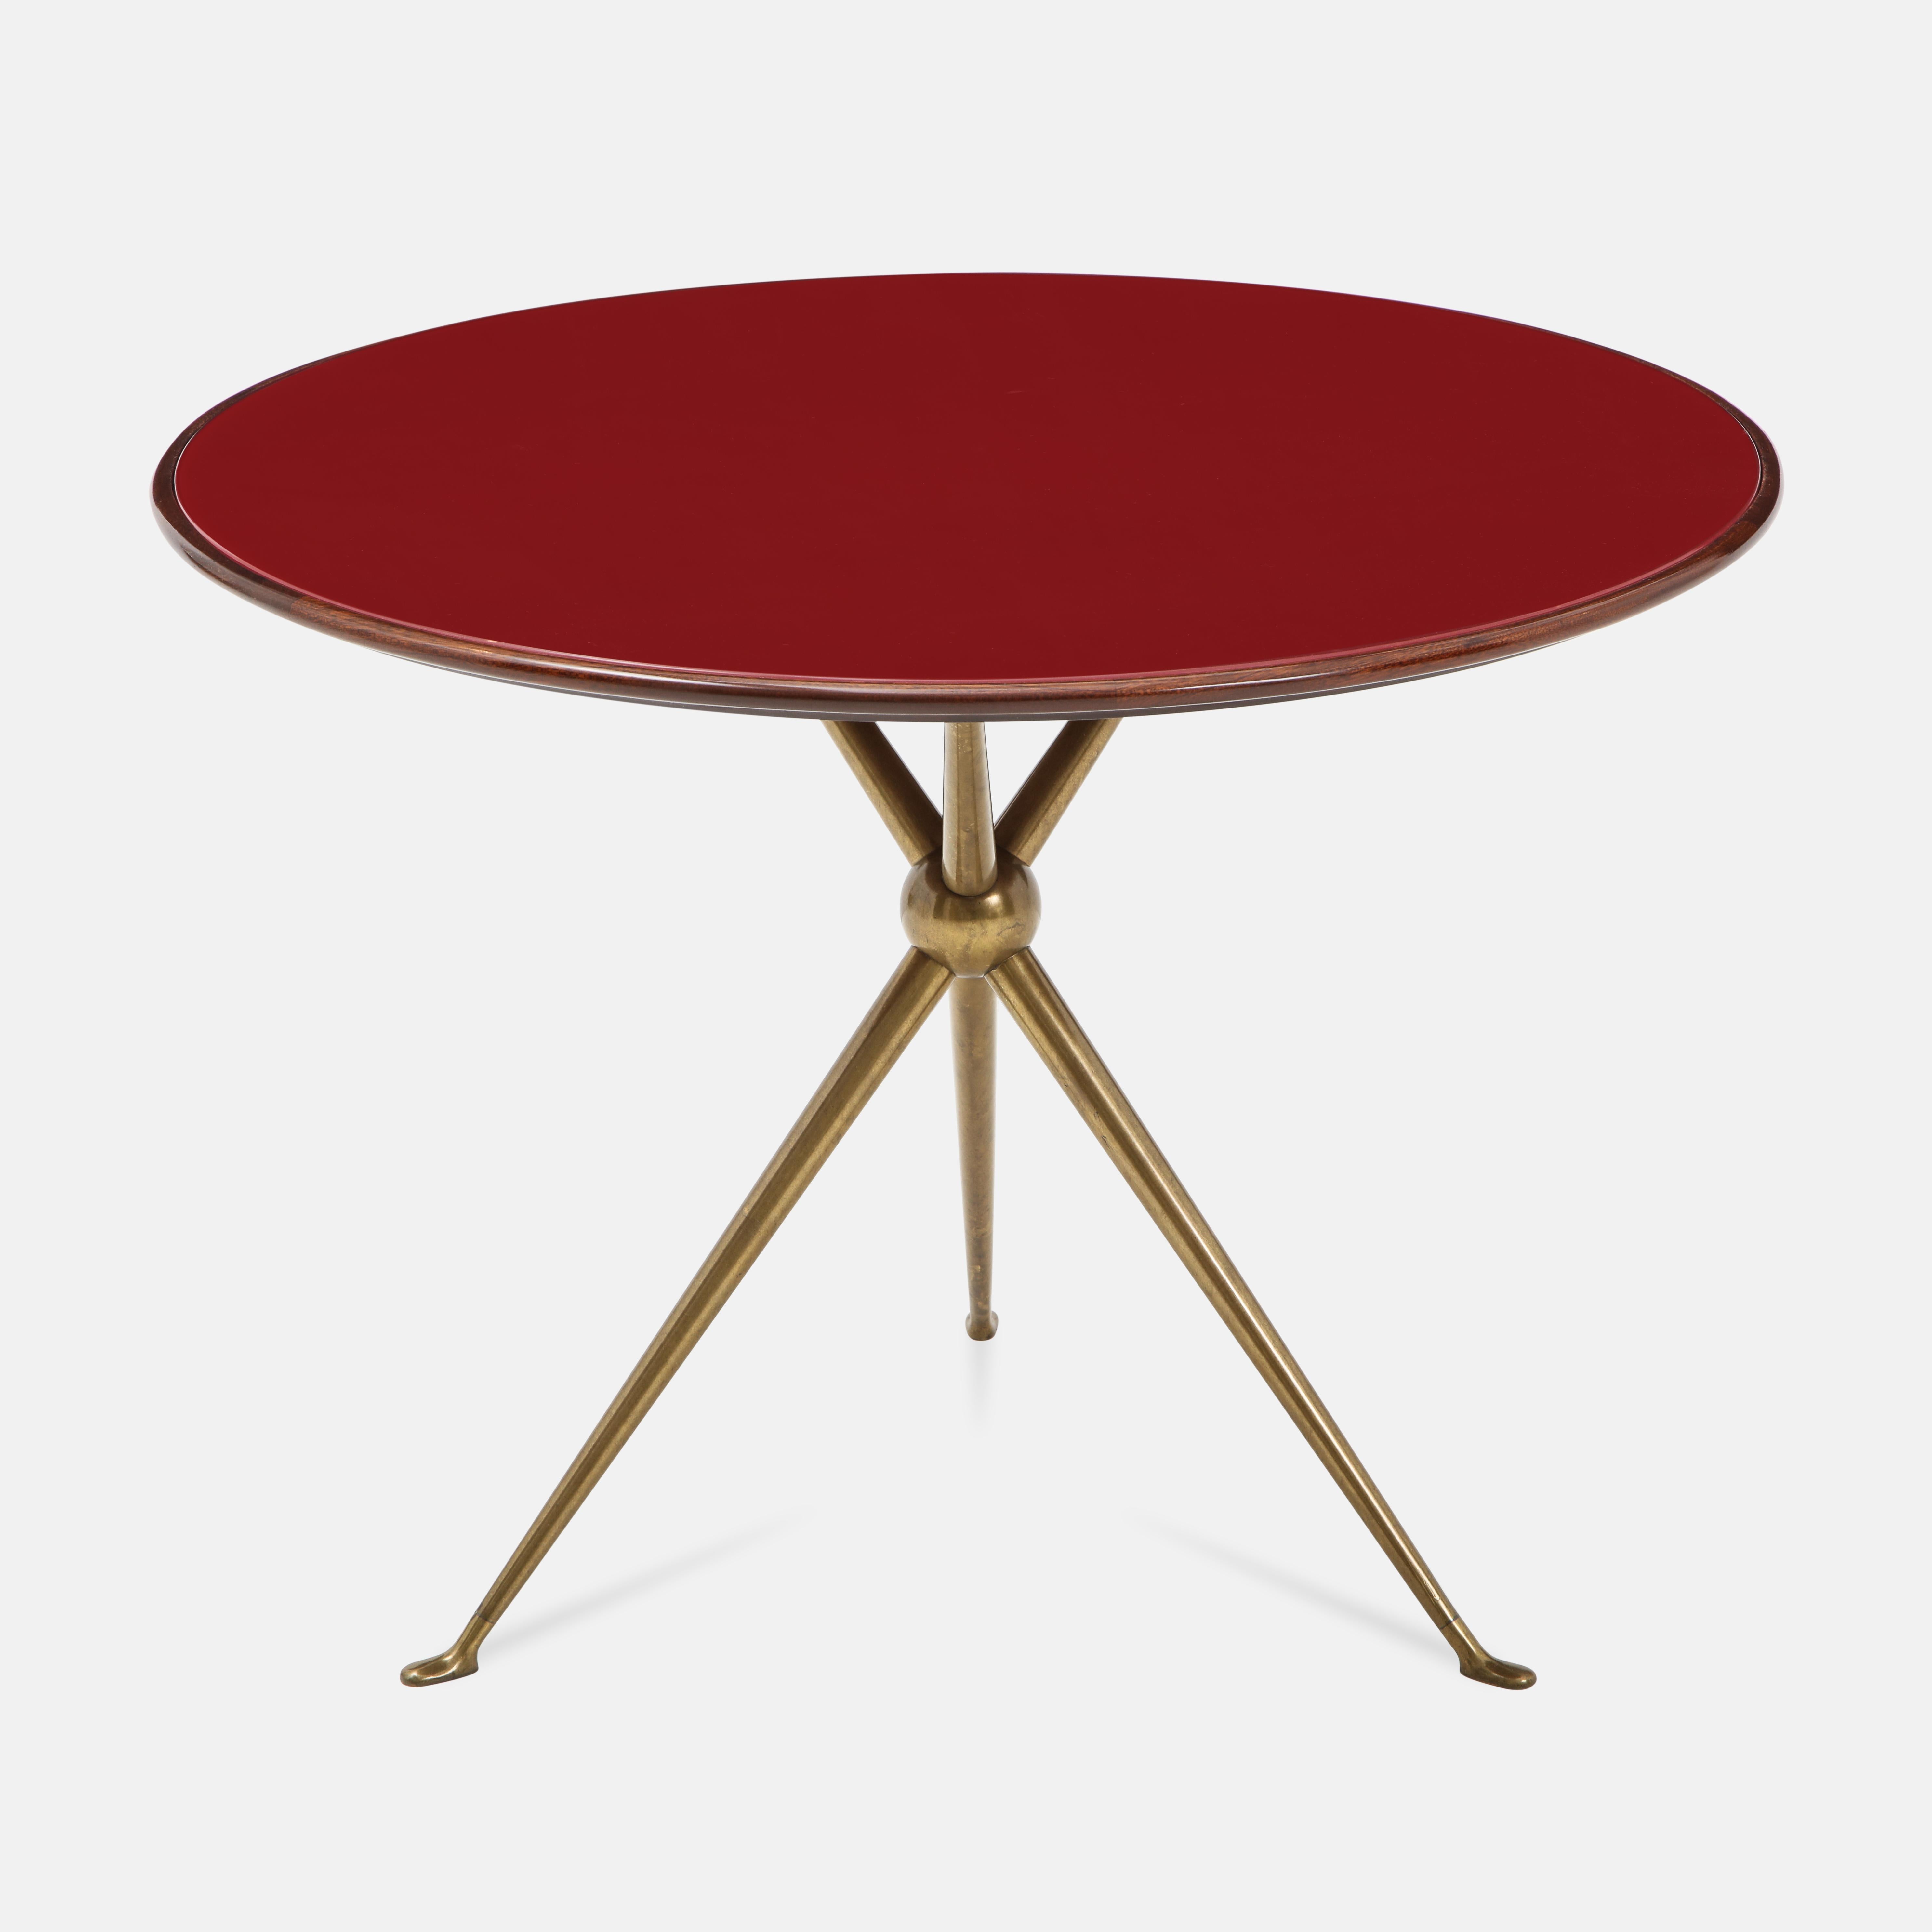 Rare occasional or side table with wood top and inset reverse painted deep red glass atop gilt brass tripod base, designed by Osvaldo Borsani and manufactured by Arredamenti Borsani Varedo, Milan. Beautifully modern lines and proportions in a